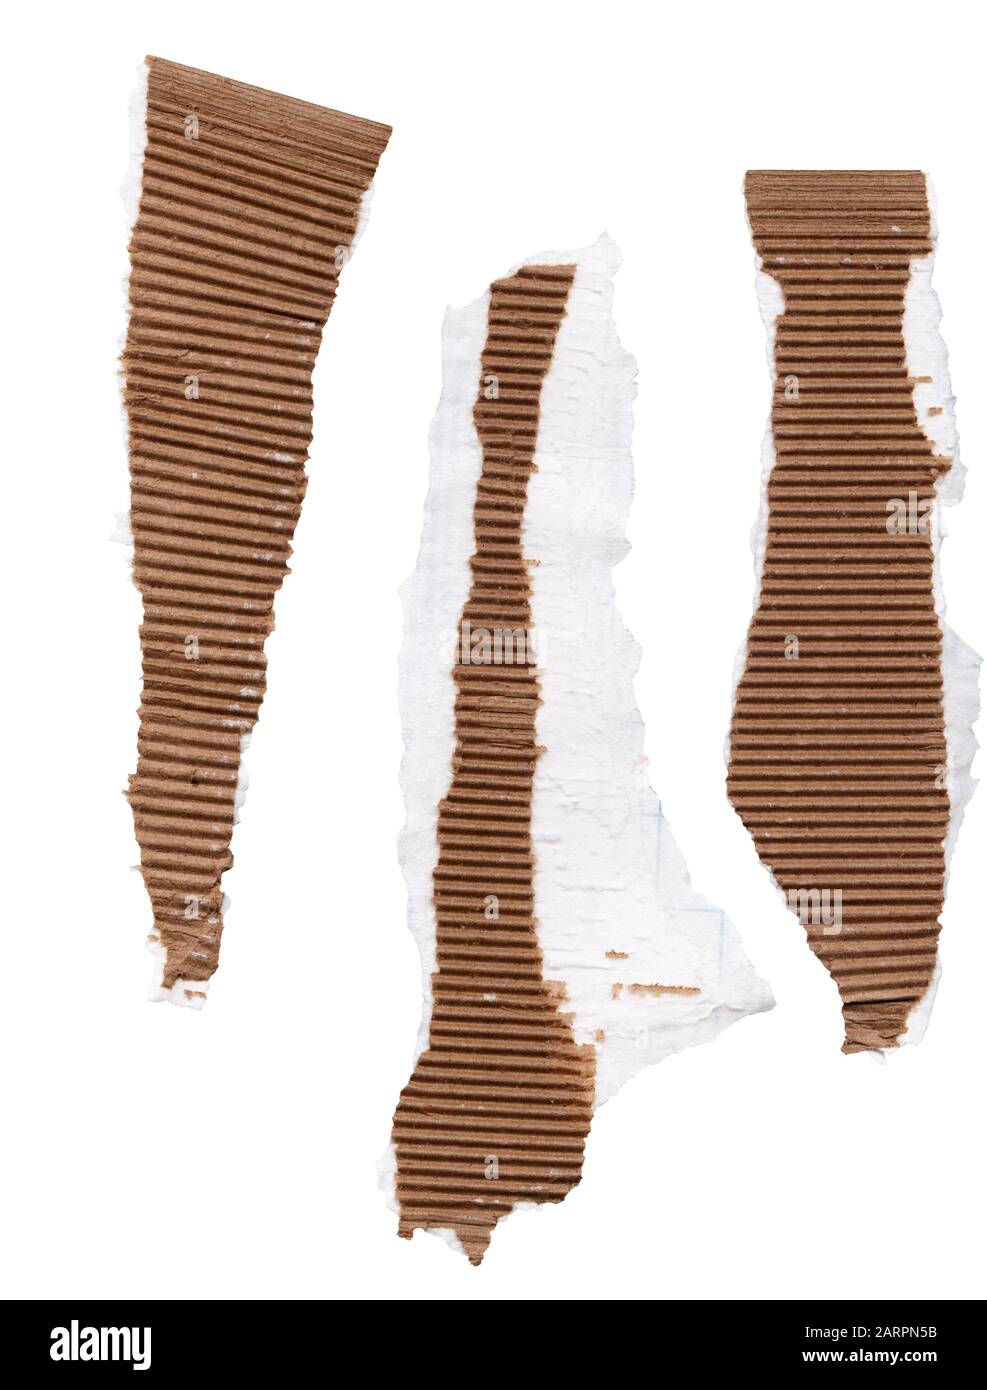 Three pieces of ripped corrugated cardboard packaging showing white edging on isolated background. This is a high resolution scan. Stock Photo